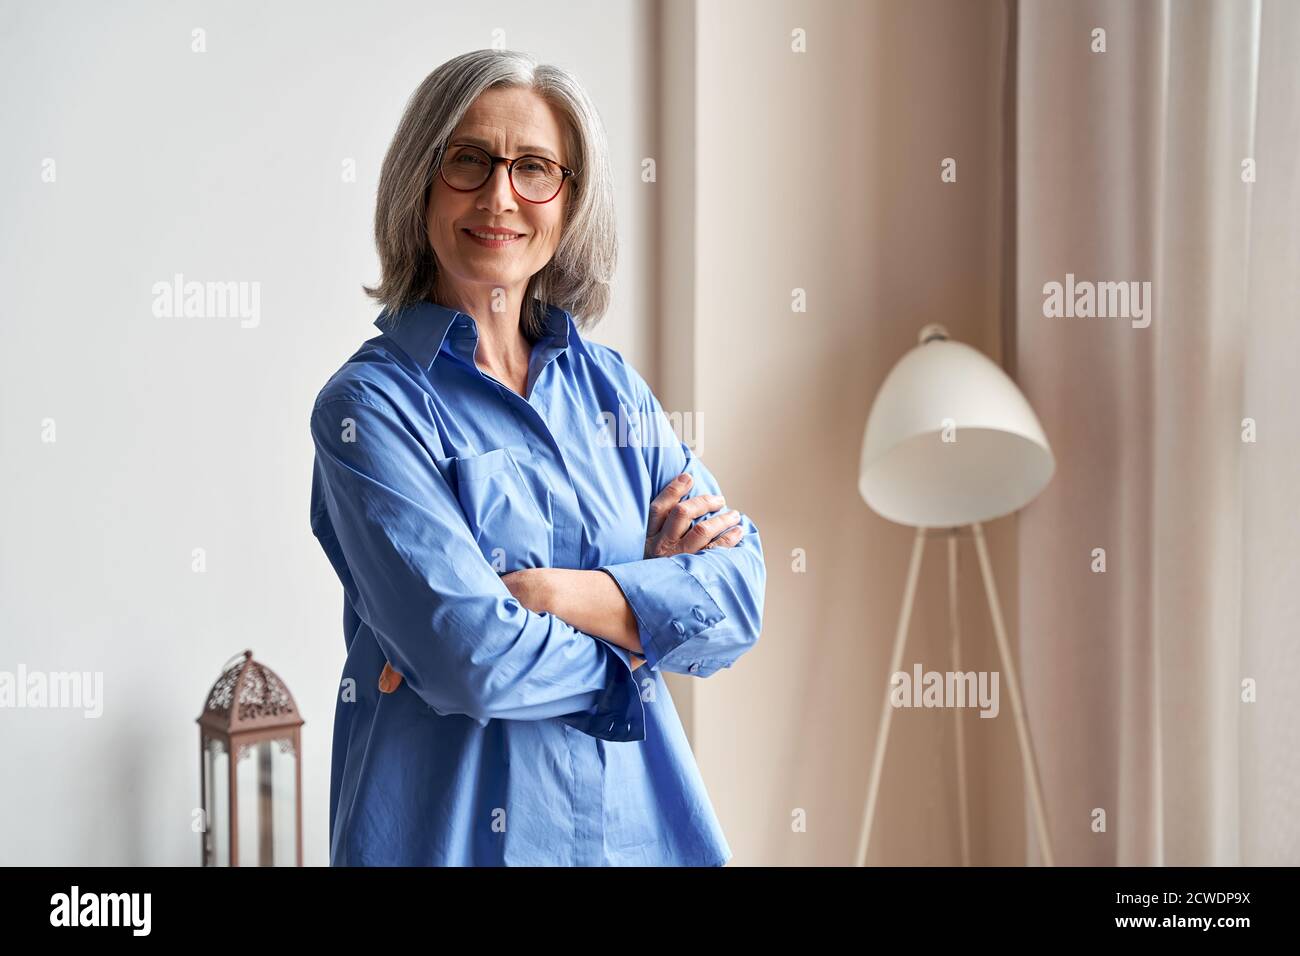 Smiling confident older lady standing arms crossed looking at camera, portrait. Stock Photo